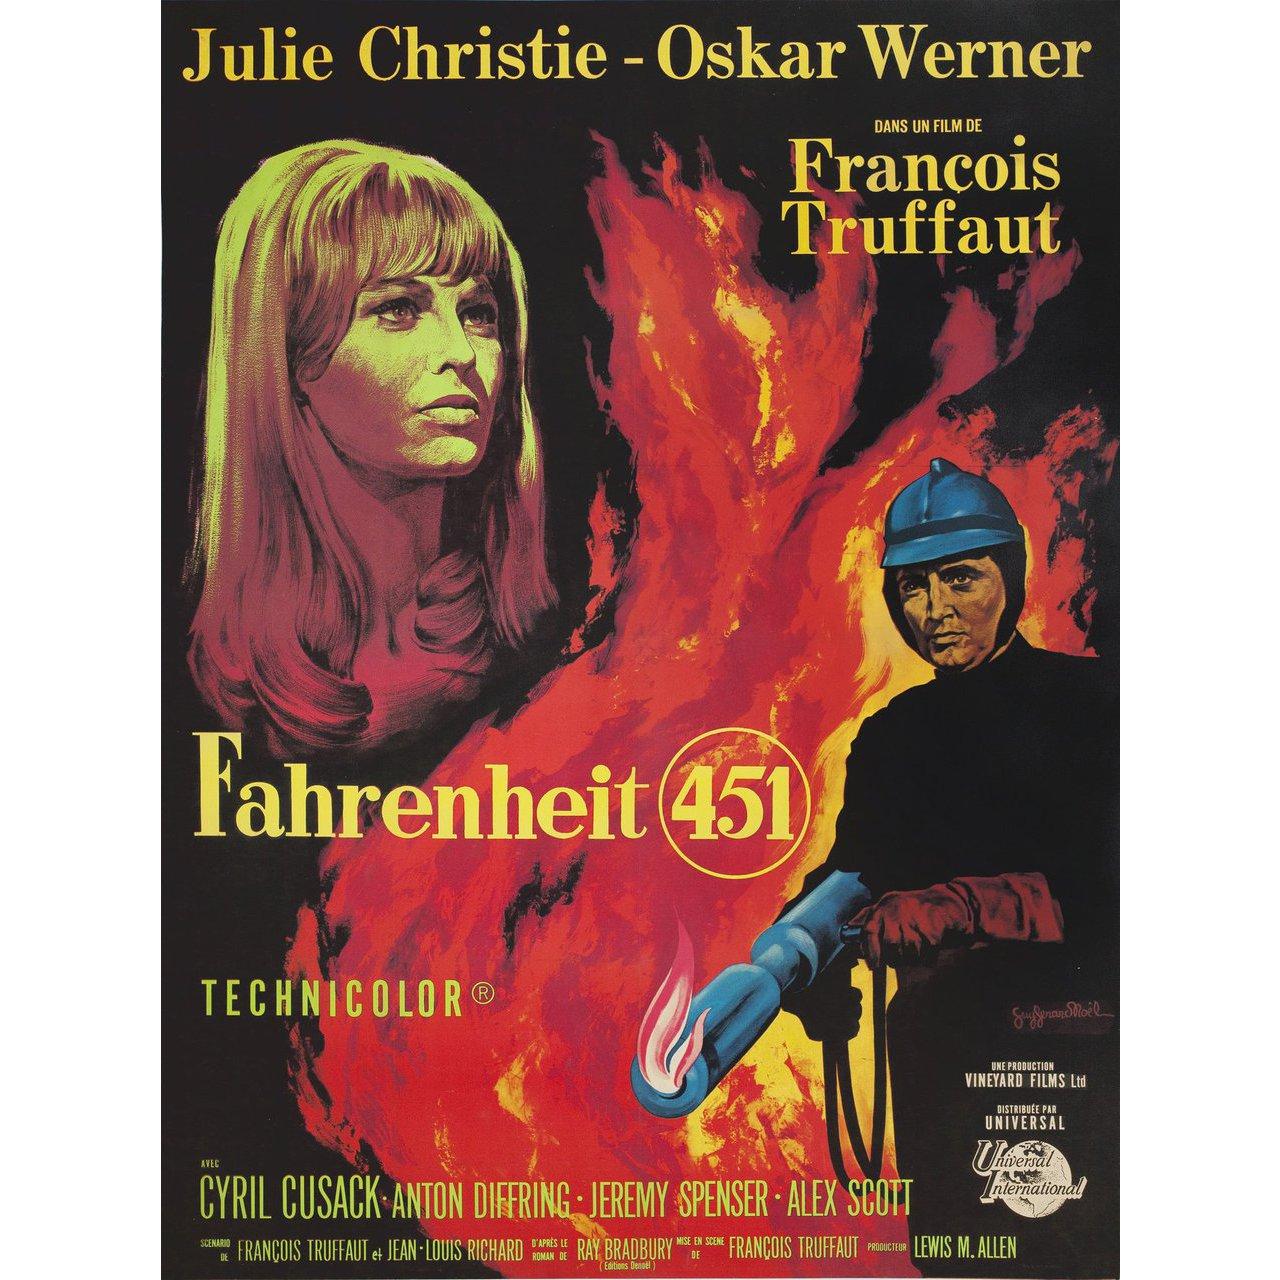 Original 1967 French grande poster by Guy Gerard Noel for the film Fahrenheit 451 directed by Francois Truffaut with Julie Christie / Oskar Werner / Cyril Cusack / Anton Diffring. Fine condition, linen-backed. This poster has been professionally